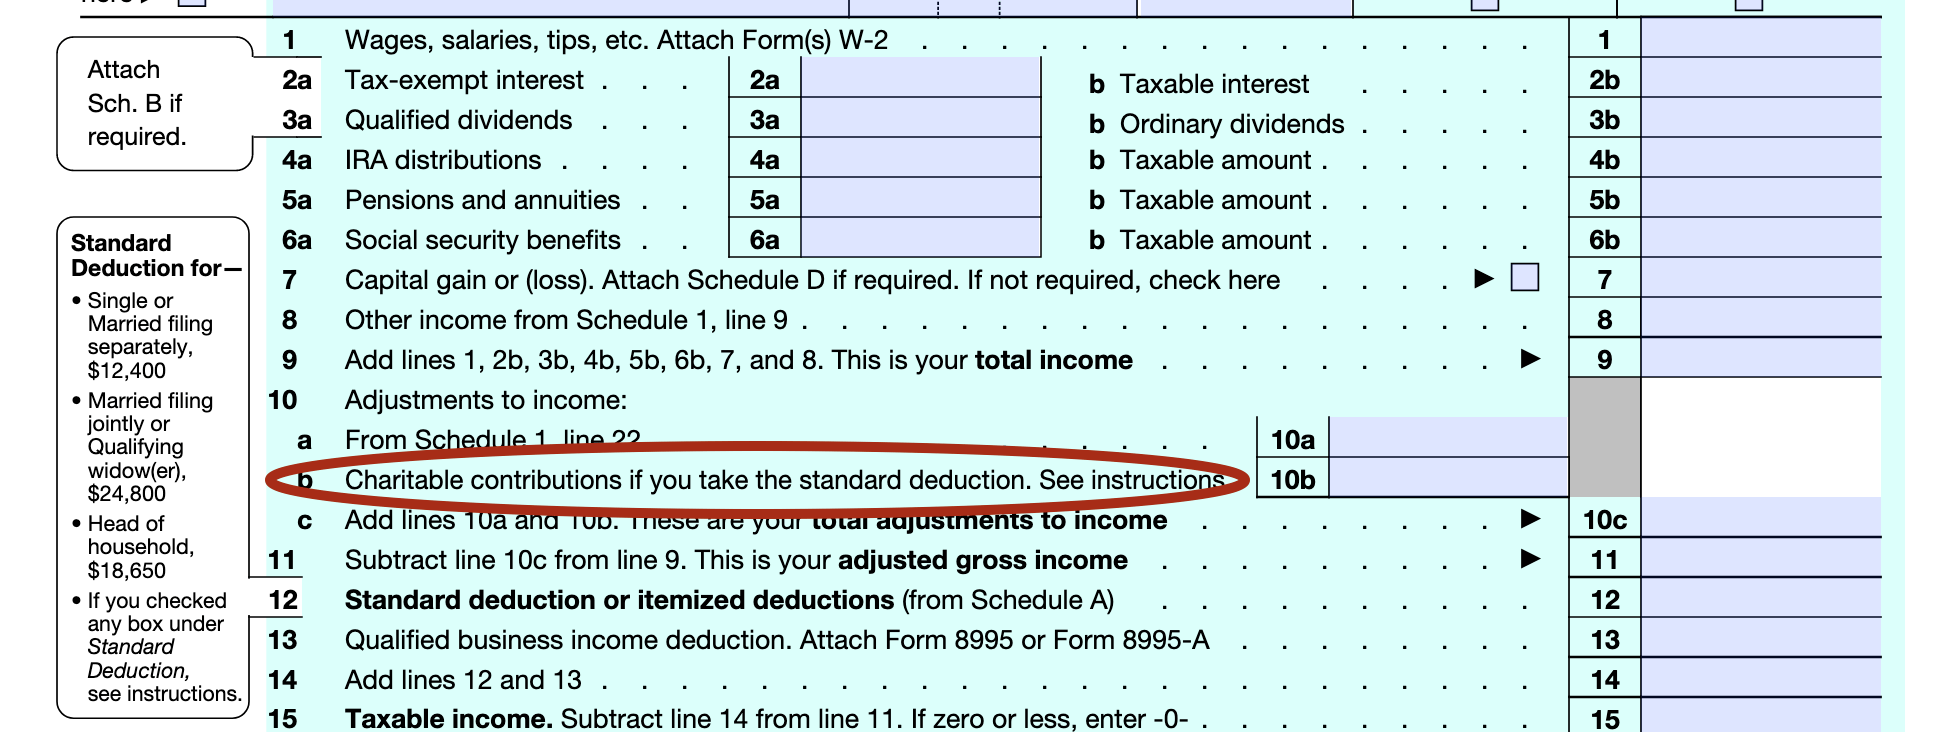 turbotax return not changing with standard deduction